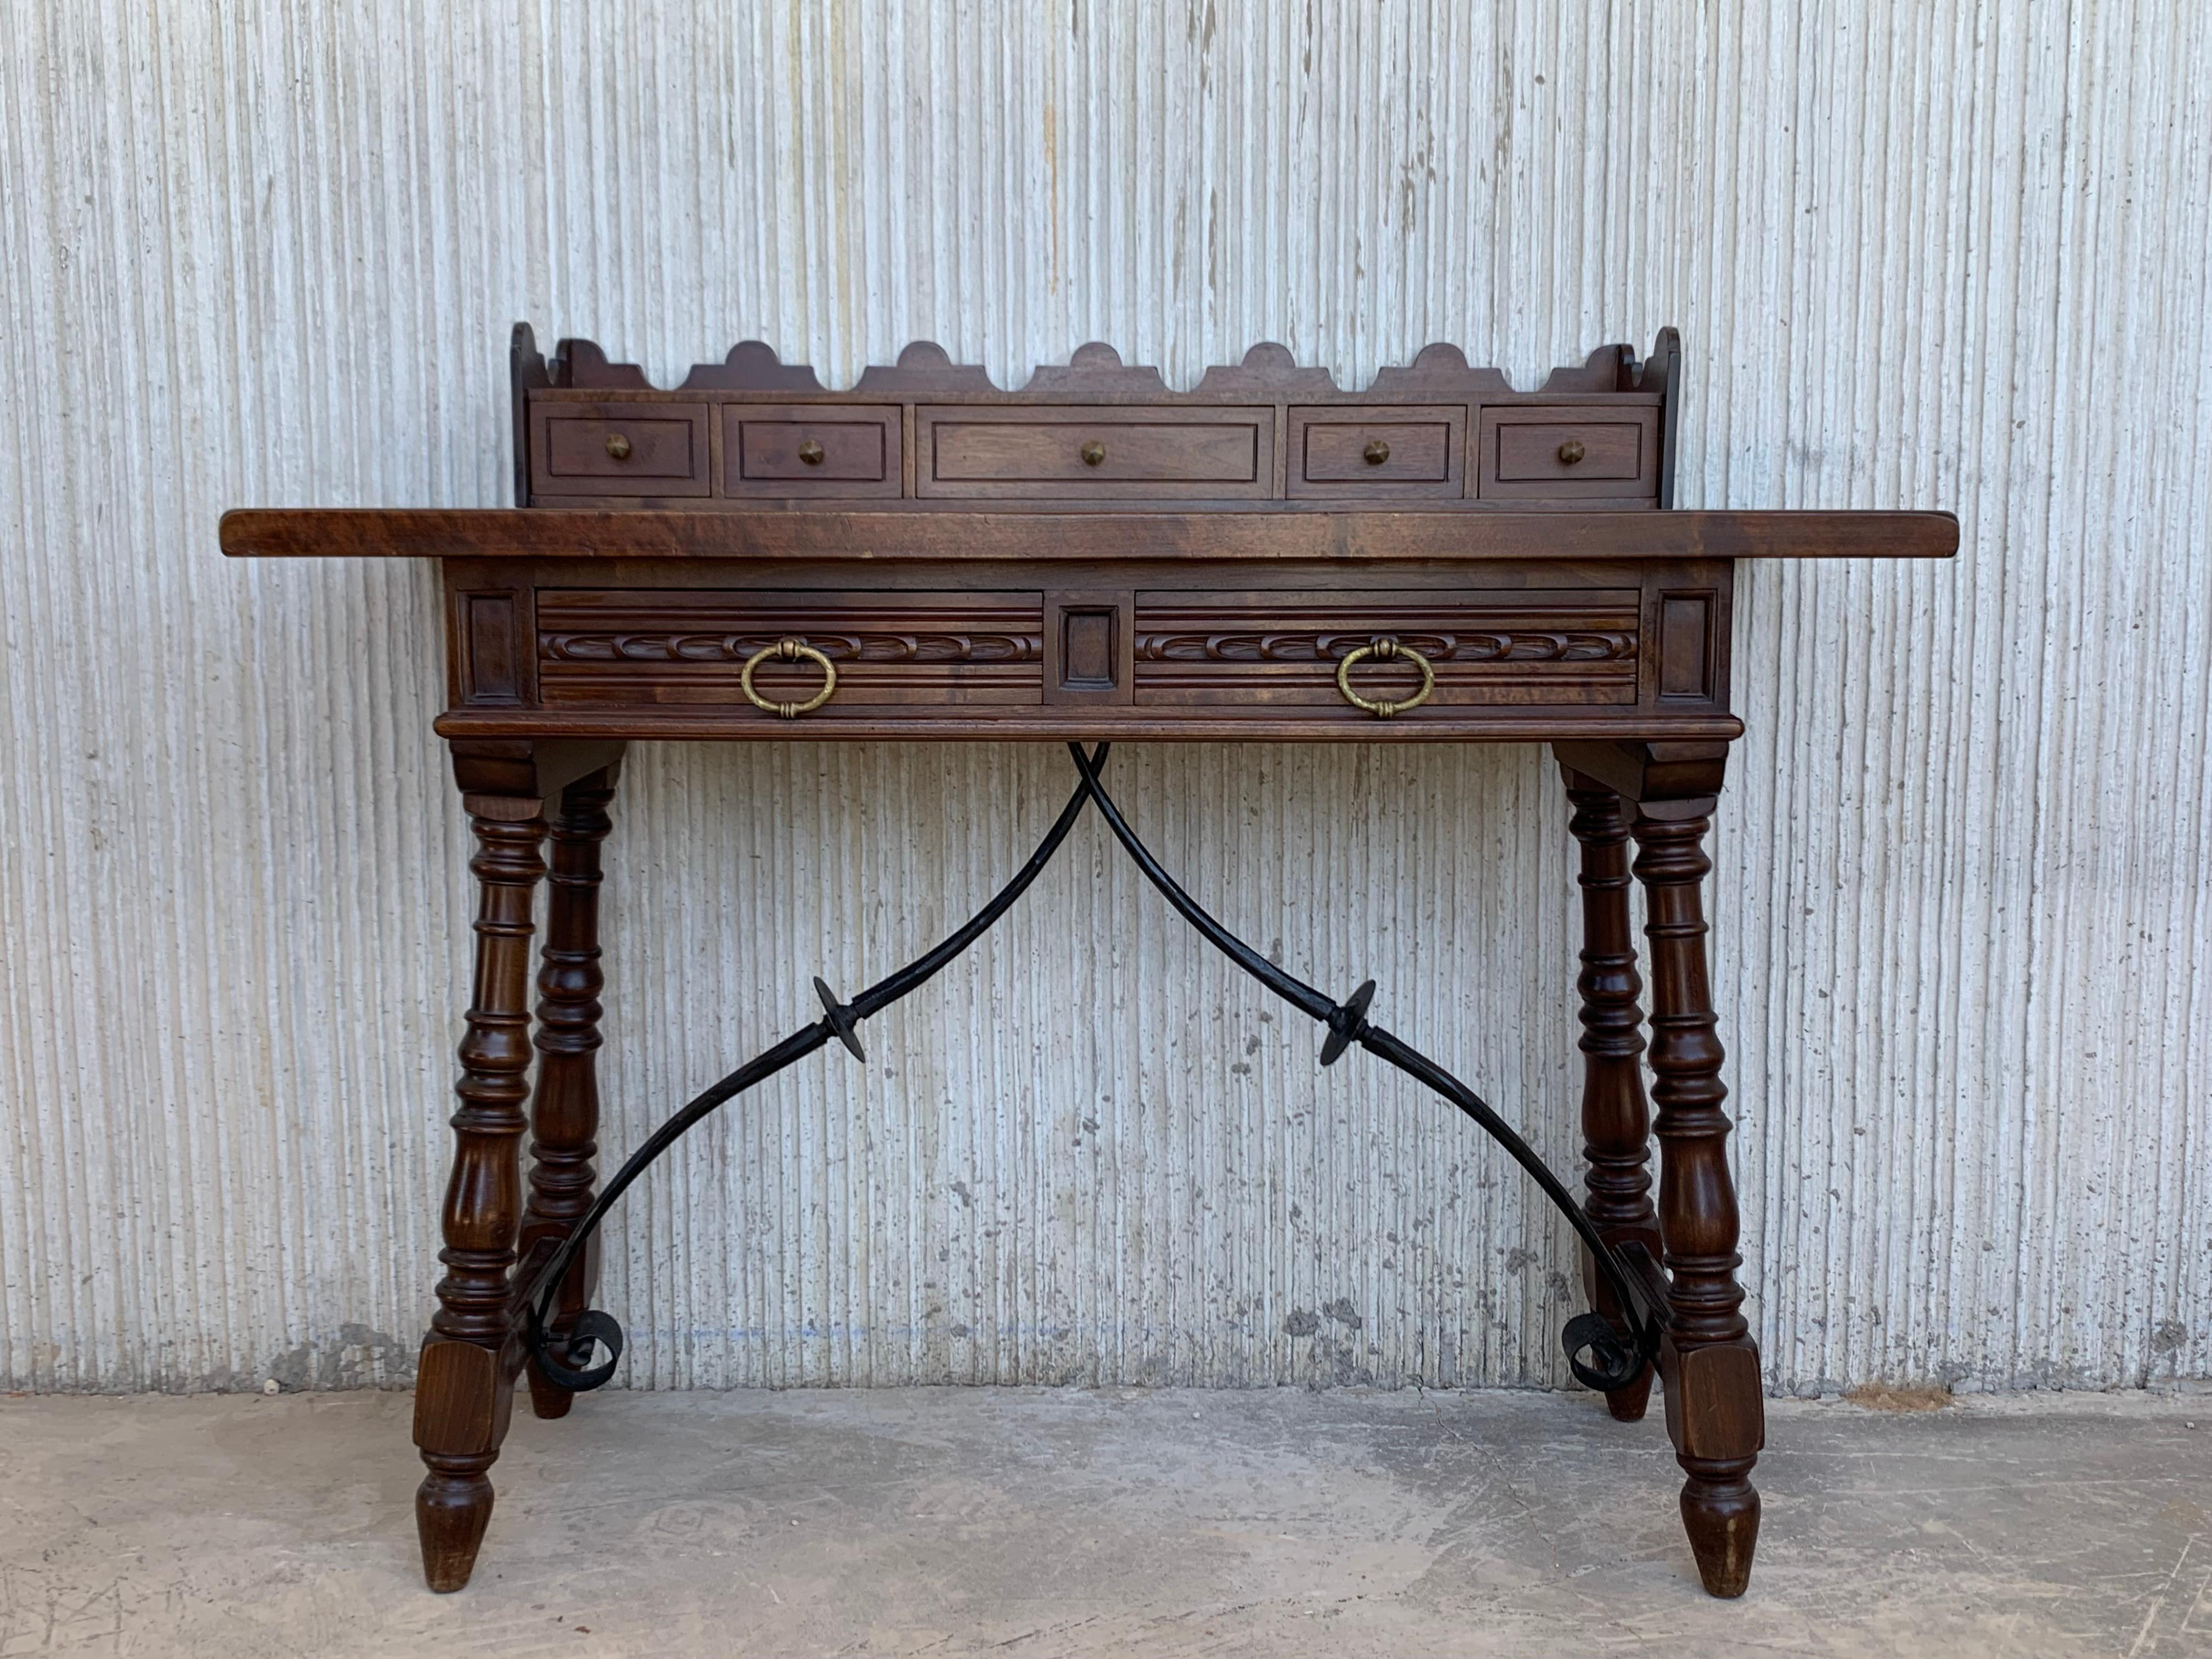 19th Century Catalan Spanish Lady Desk or Console Table in Carved Walnut and Iron Stretcher For Sale